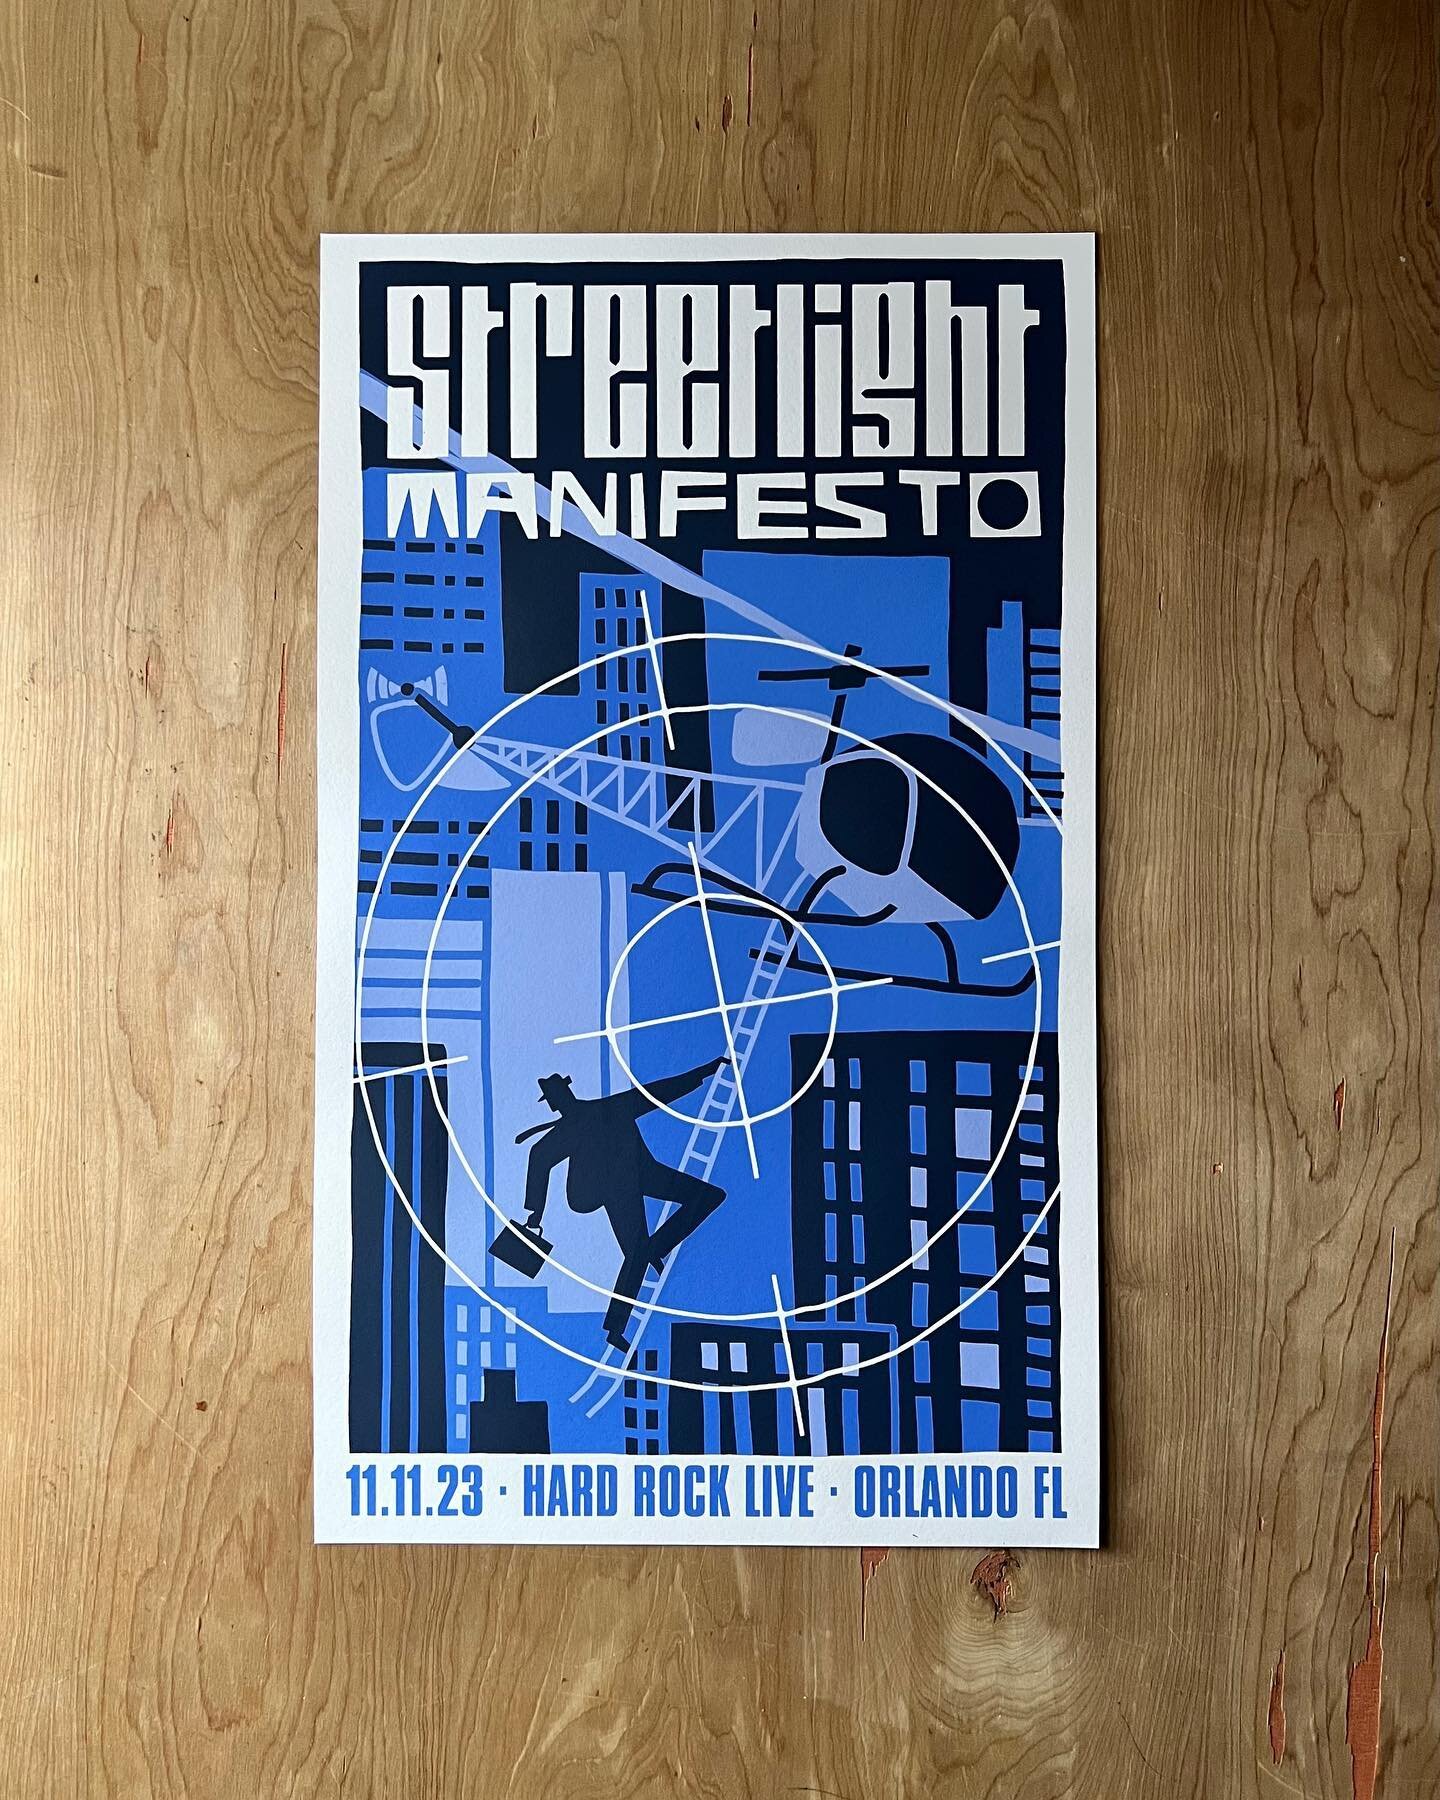 Whoa whoa whaddya know? Another poster posted post-production. Screen printed for the one and only @smanifesto who truly rock hard live. And the coolest artwork with the coolest of tones by @andre_ducci. 
.
Paper: @frenchpaperco 
Ink: @speedball_art